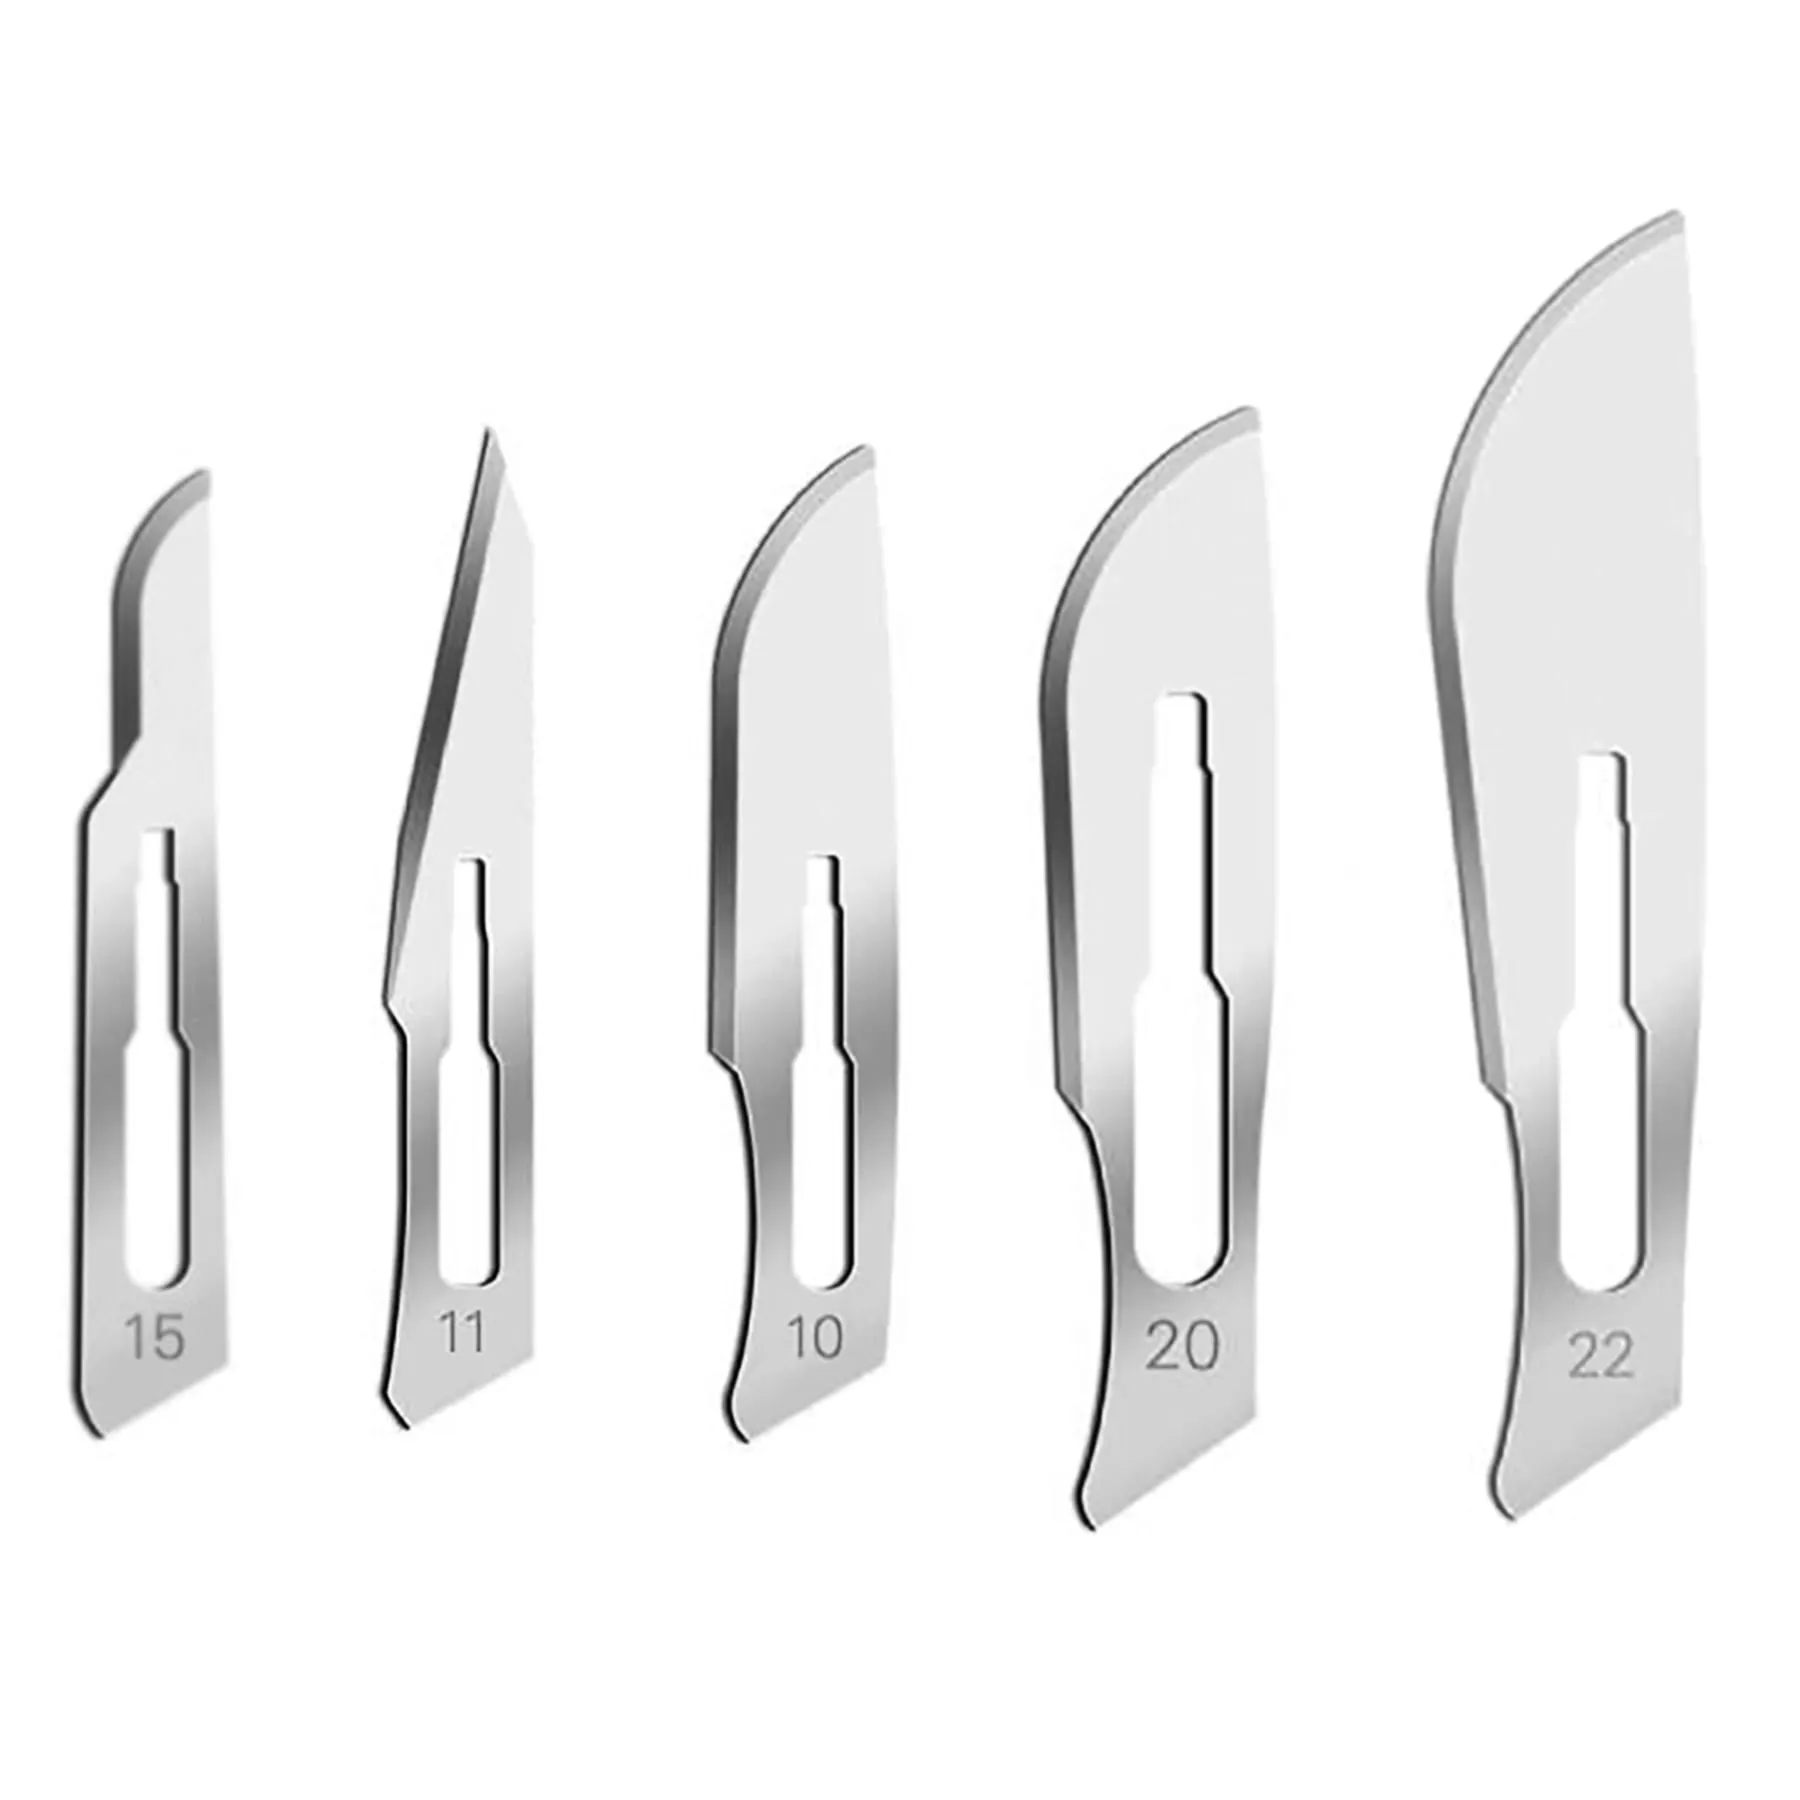 Propper - From: 12101000 To: 12102200 - Manufacturing Non sterile Carbon Steel Surgical Blades